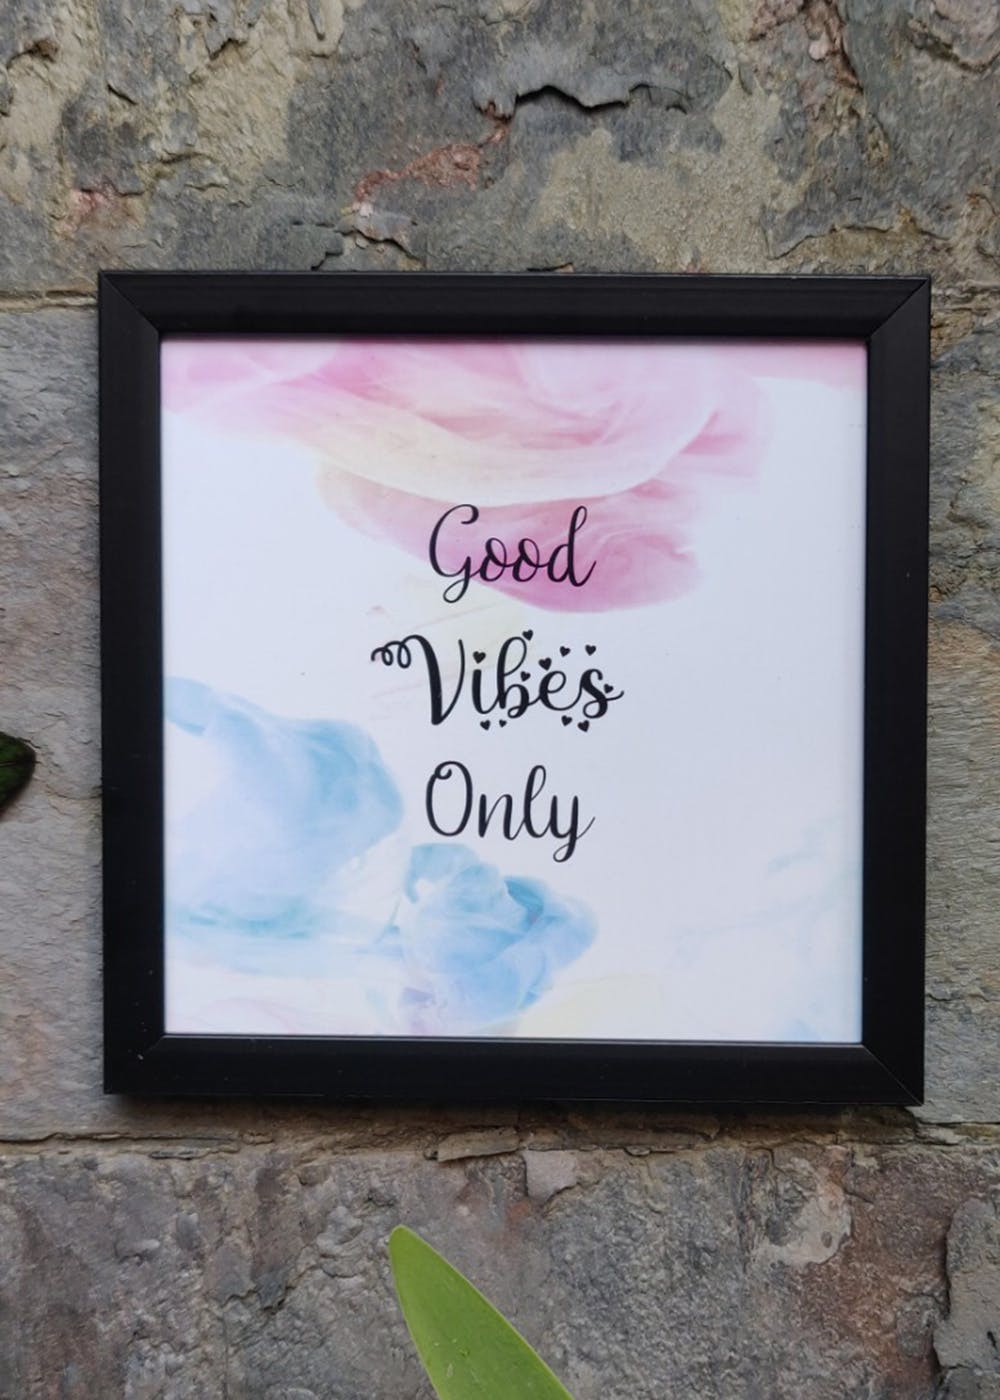 Get Good Vibes Only Wall Decor at ₹ 404 | LBB Shop